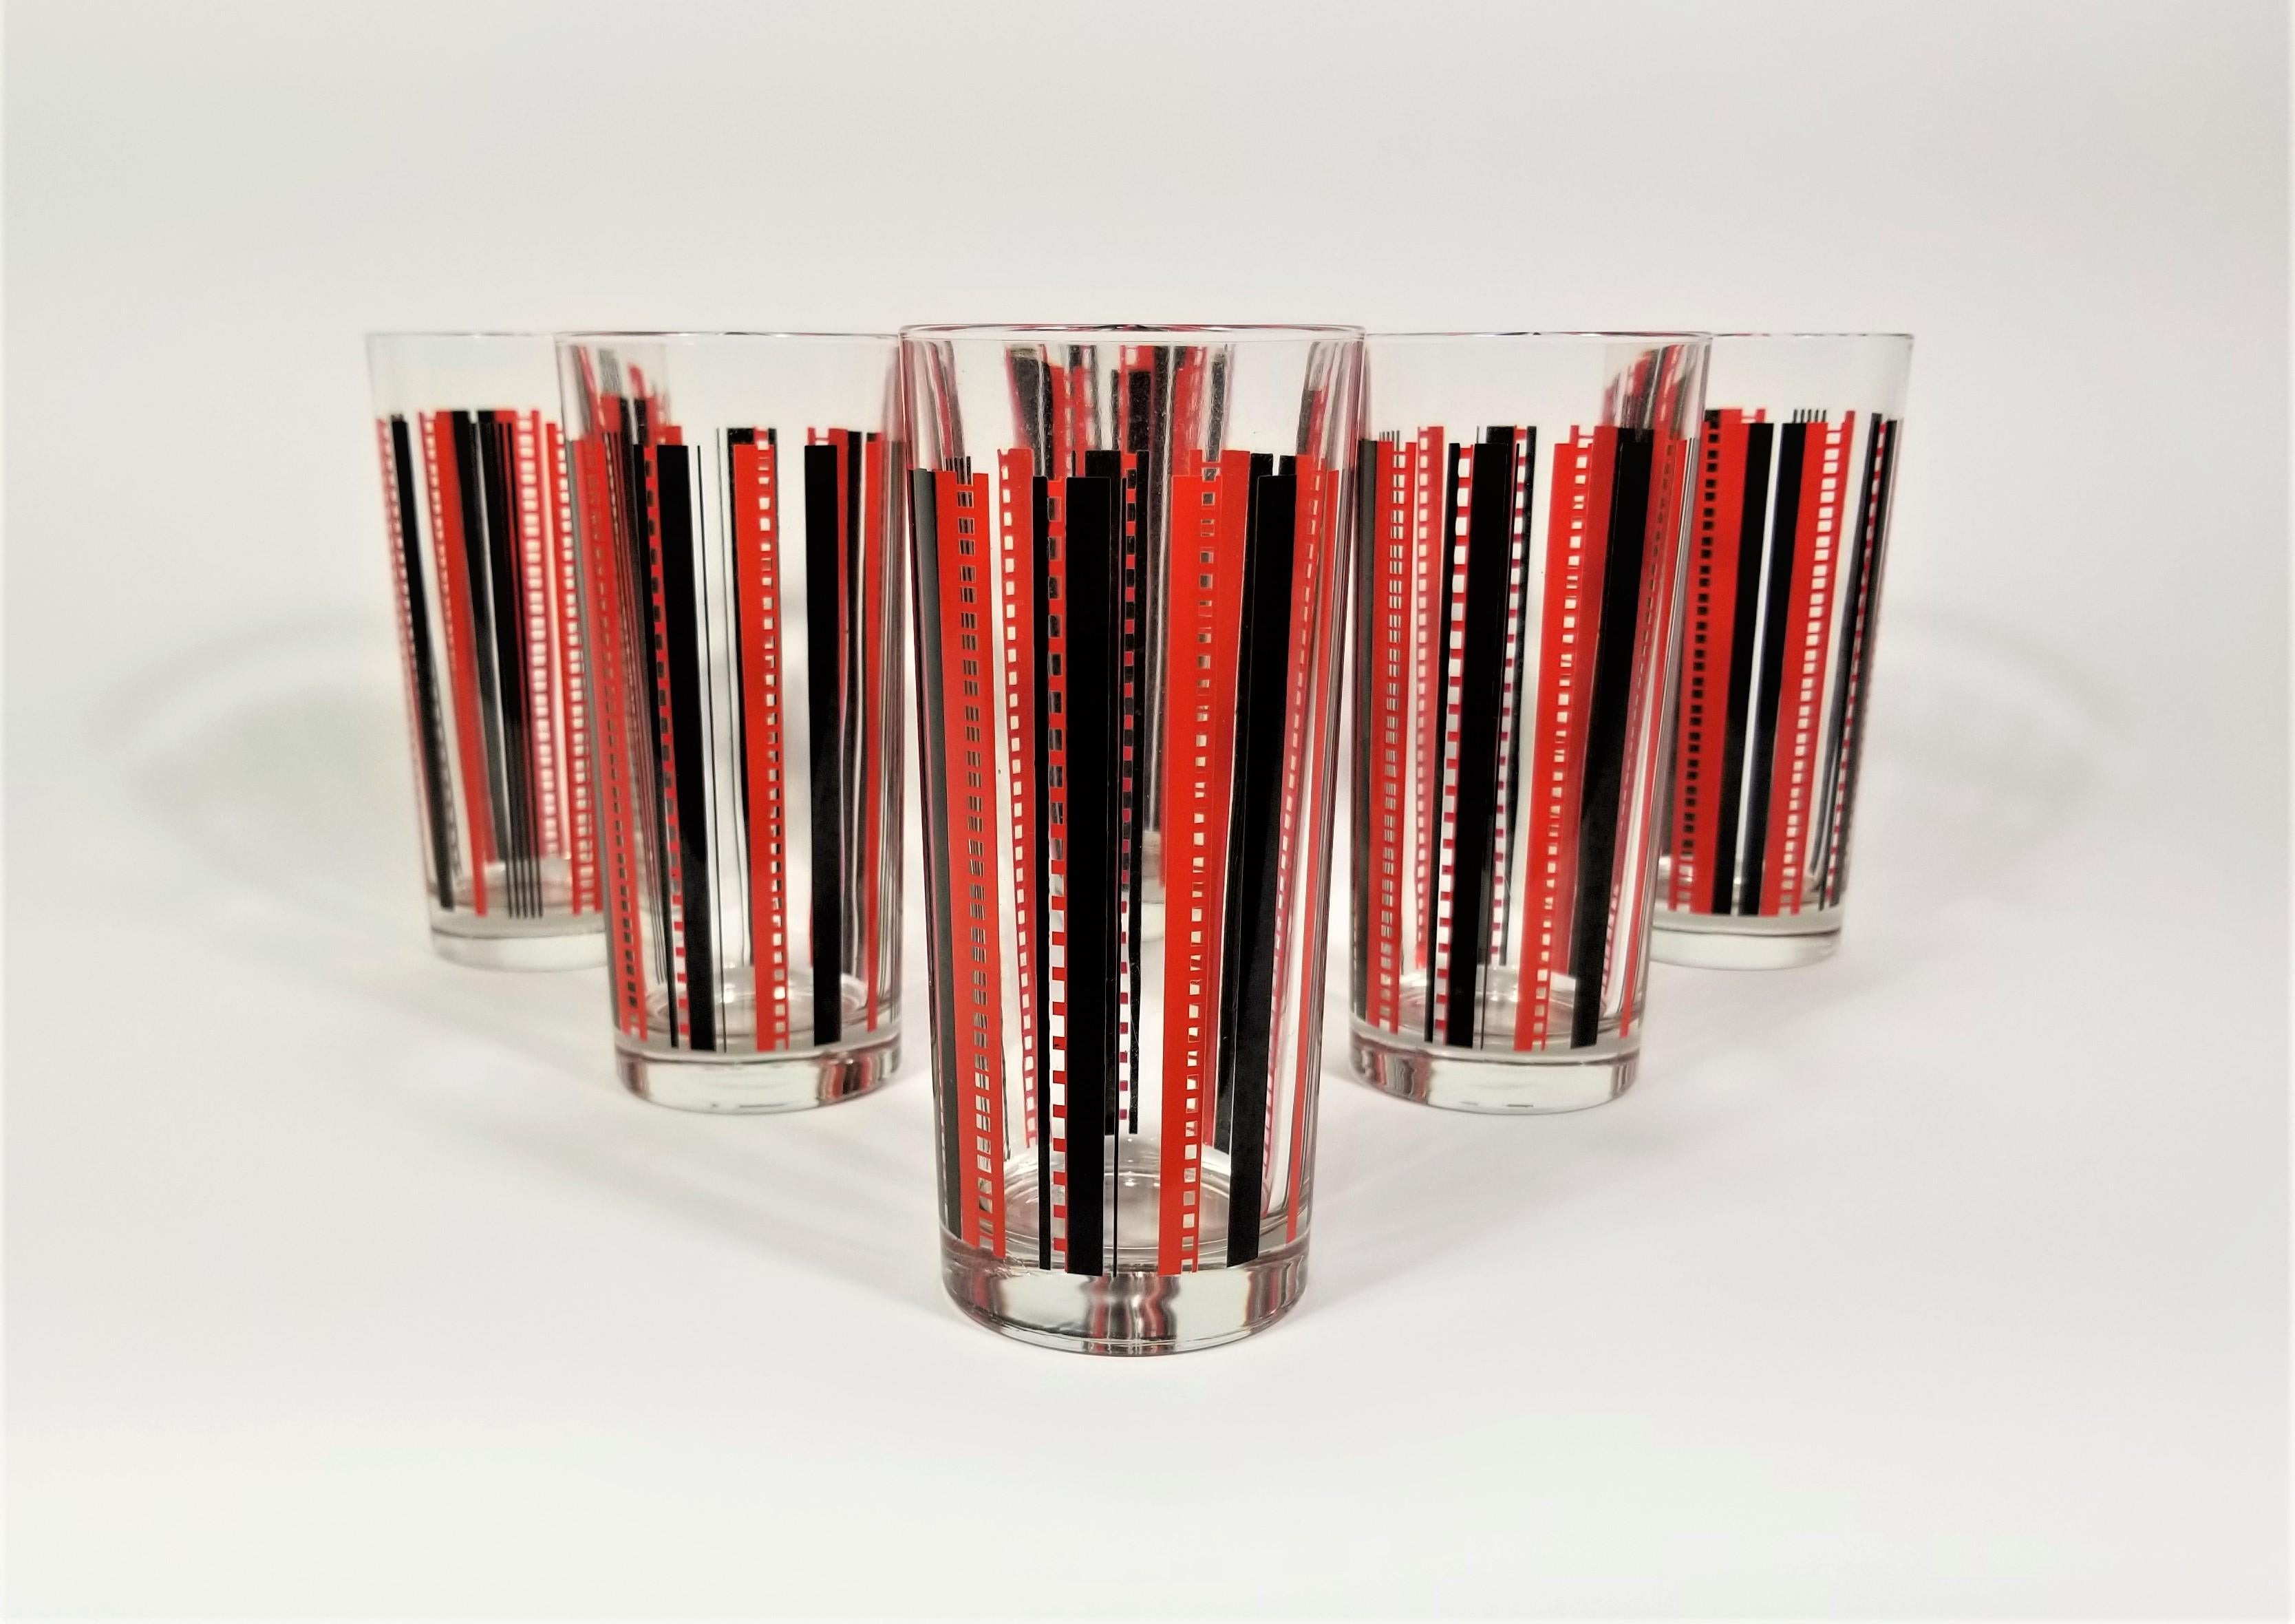 Mid Century 1940s 1950s Italian black and red glassware barware. Glass has solid substantial weight. Set of 6. All Glasses are marked Italy and in excellent condition.
 